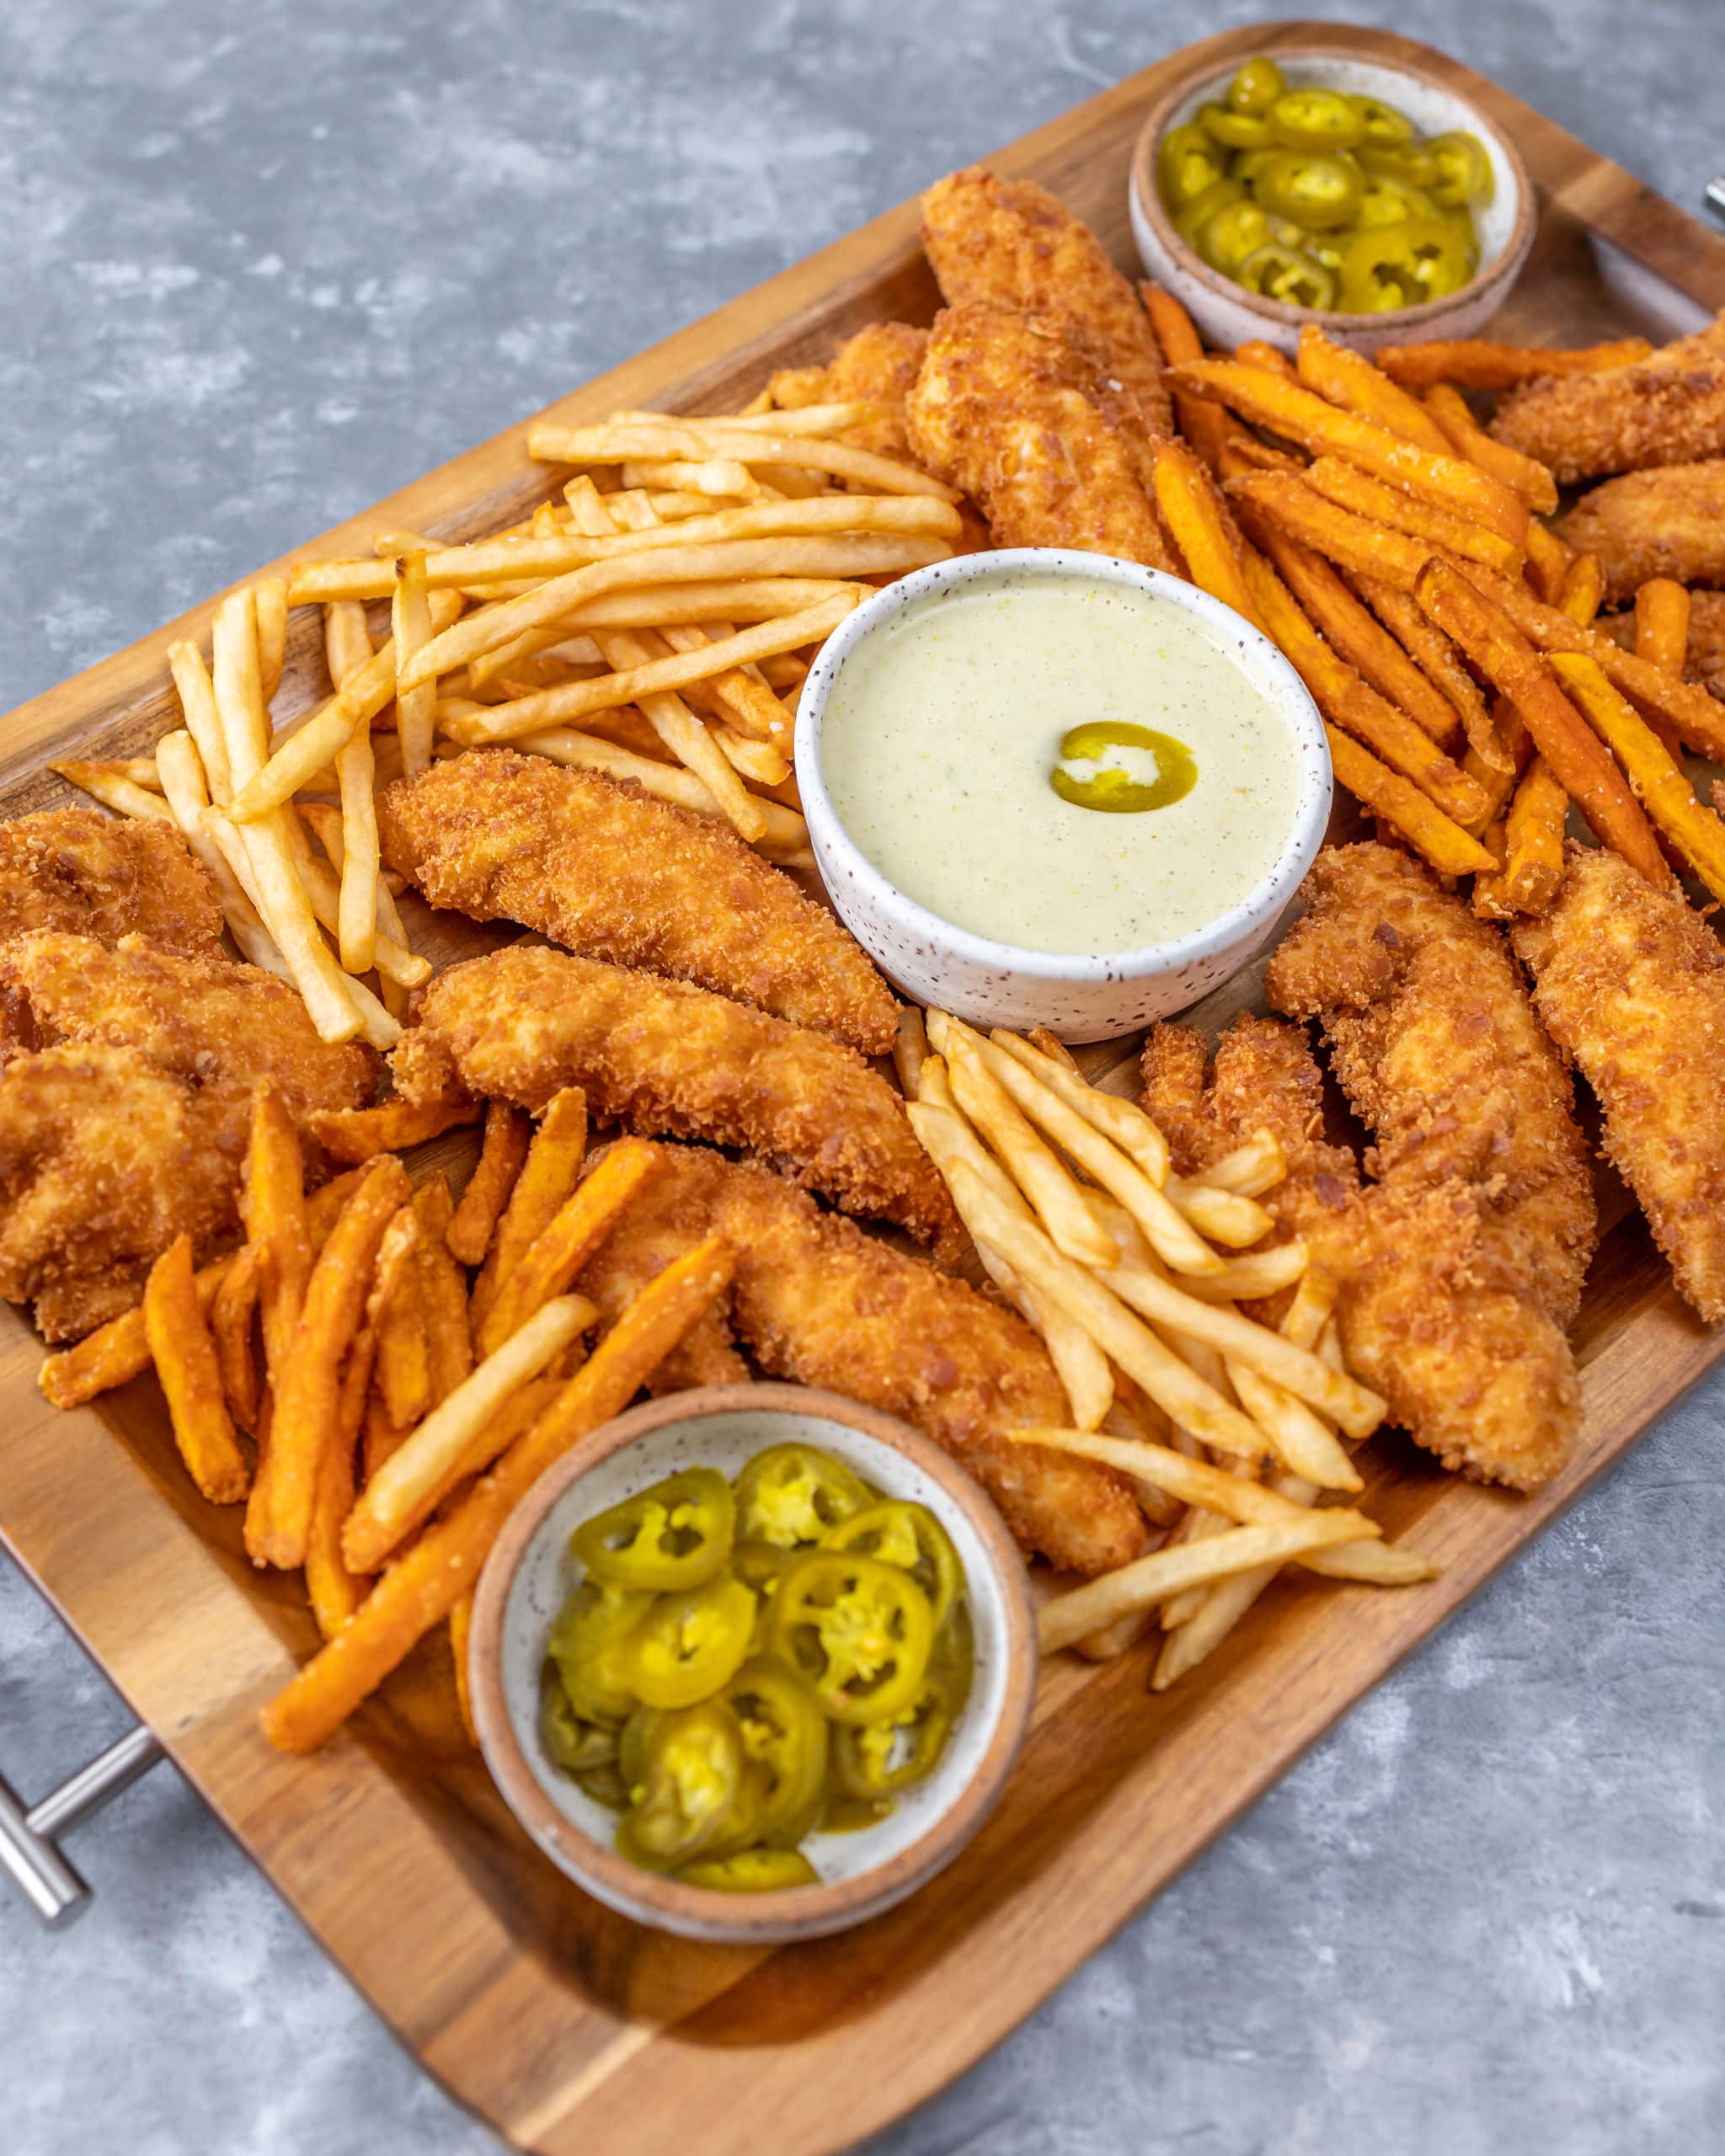 grey countertop. wood tray with dishes of jalapenos and ranch dressing. tray shows french fries and chicken tenders.